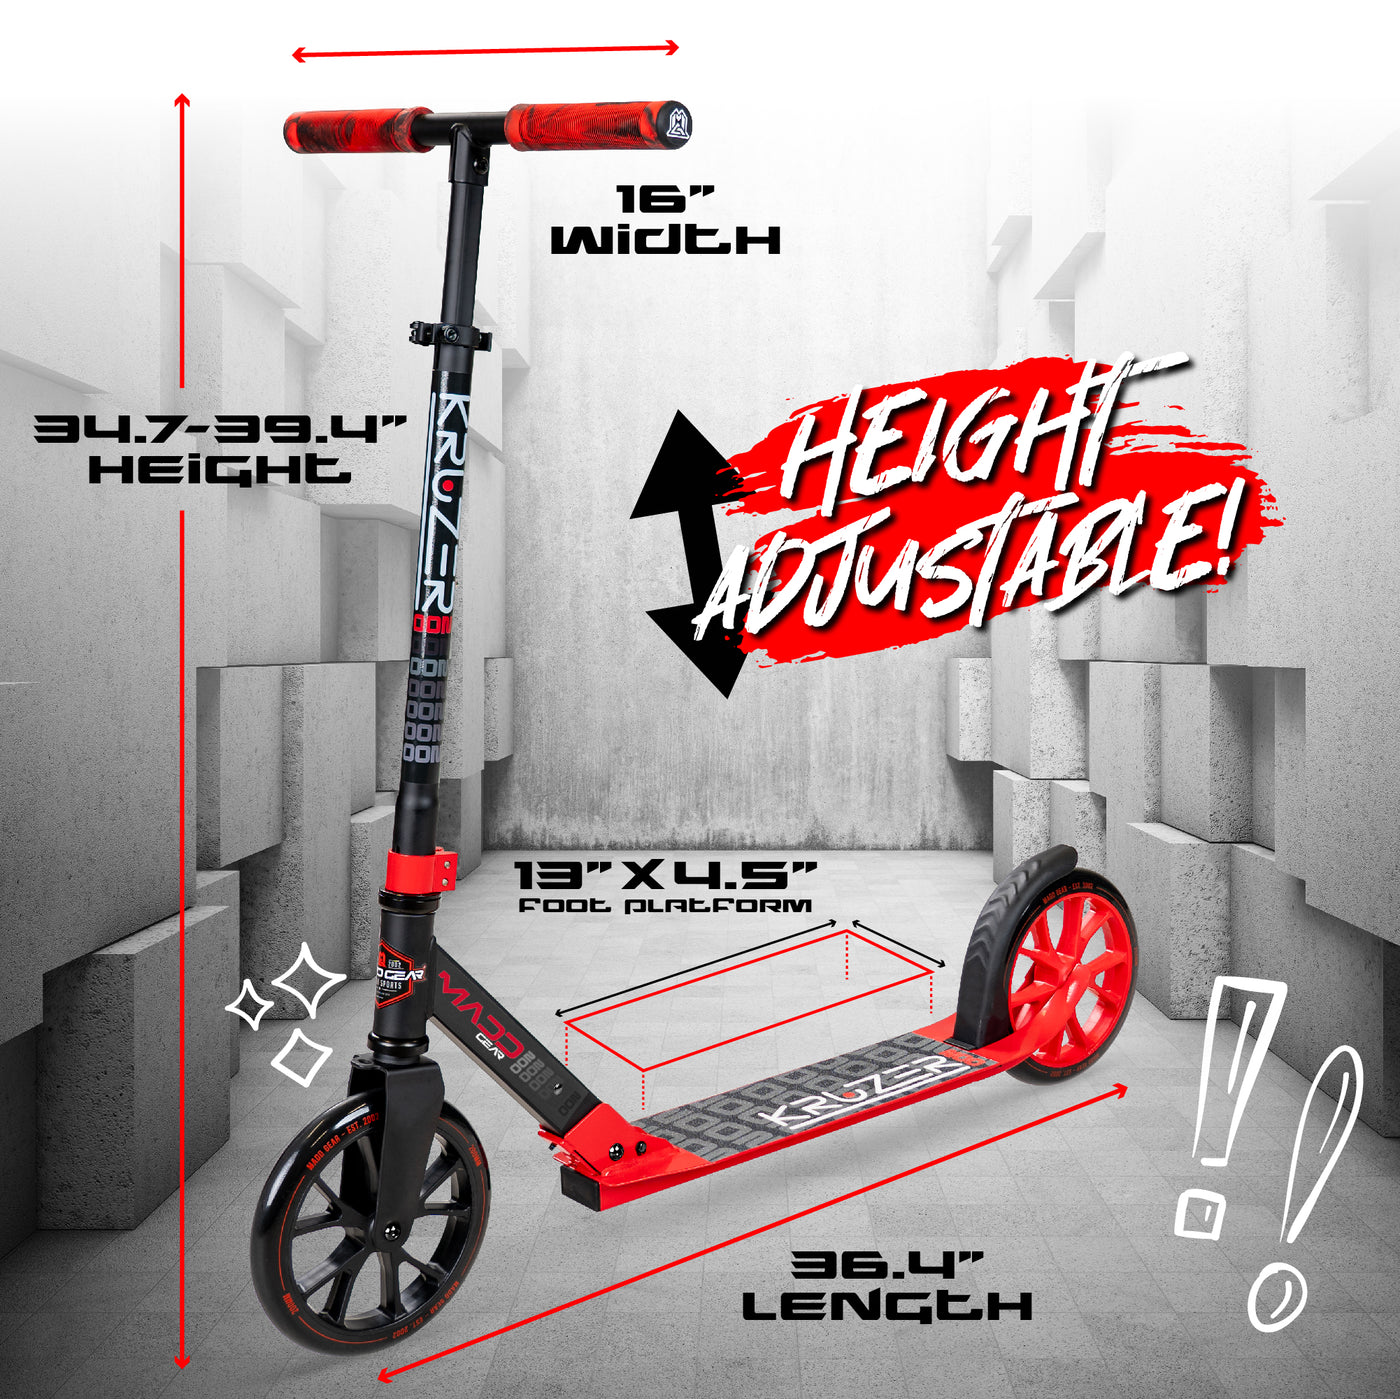 Scooter Bar Height: Ultimate Guide for Comfort & Performance – Madd Gear